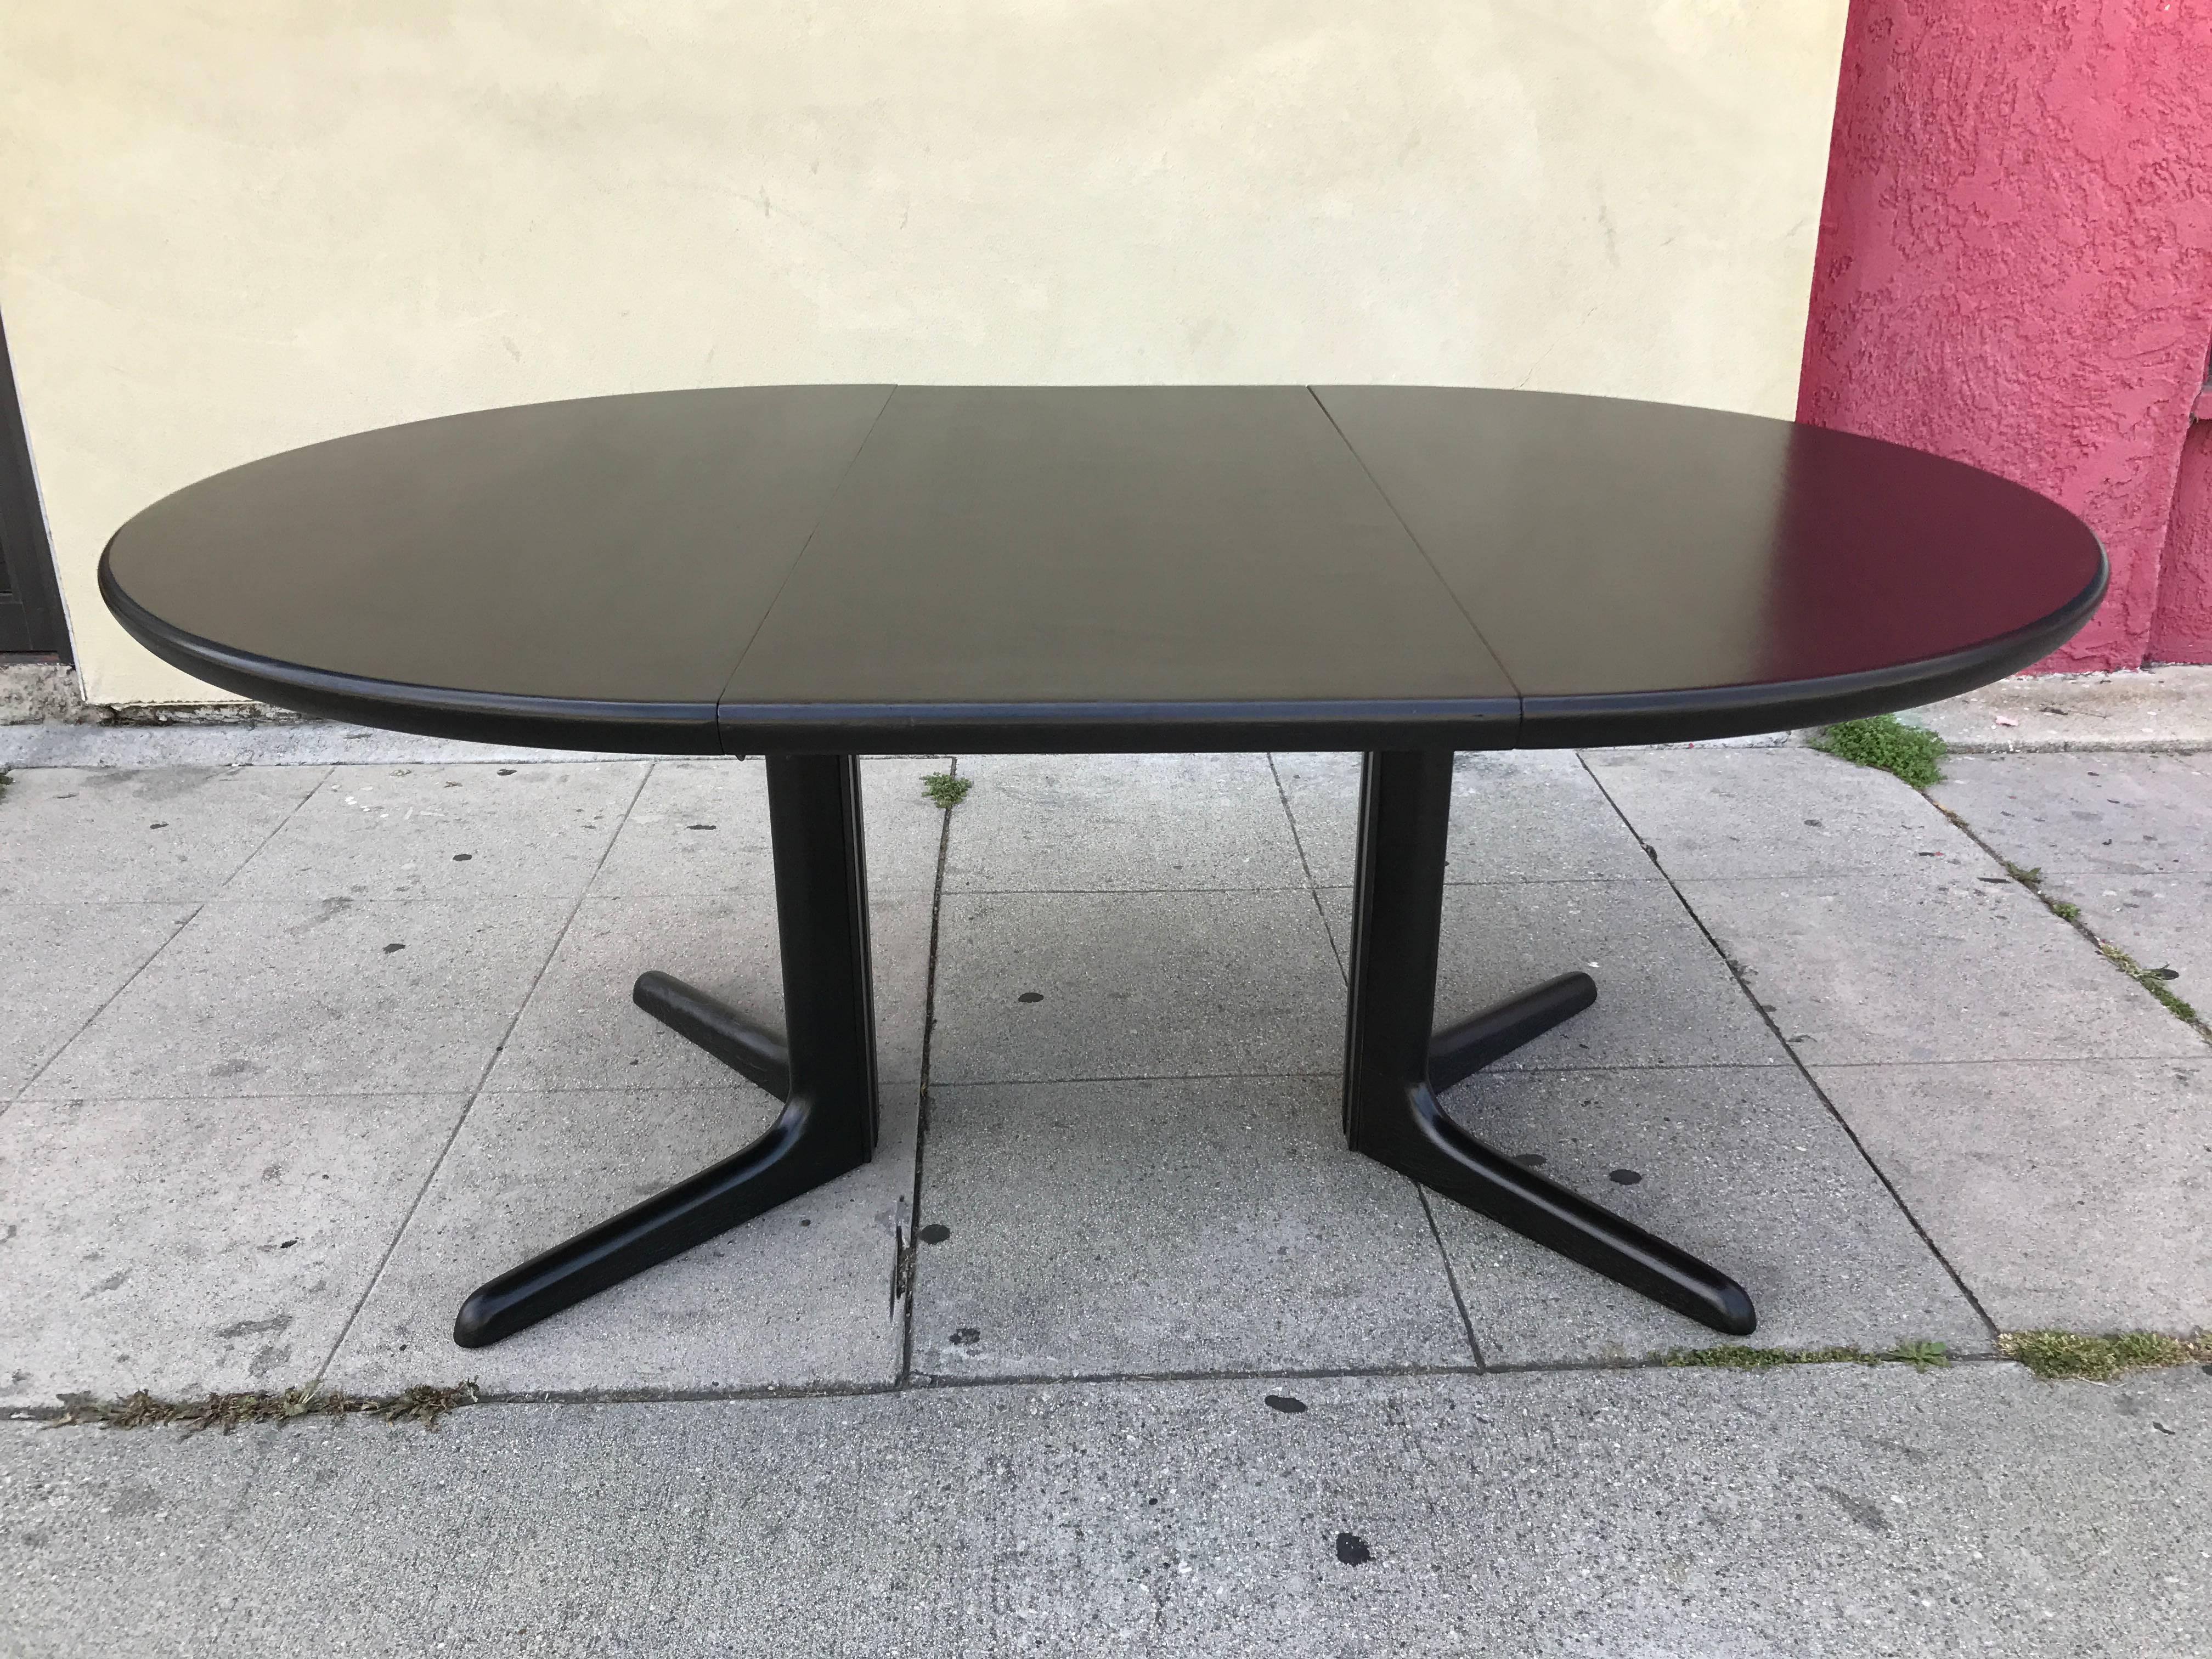 Round ebonized teak dining table comes with an extension which makes the table oval shaped. Design by Niels Koefoed for Koefoed

Extension measurements 19.63"
Total width of table with extension is 67.13".